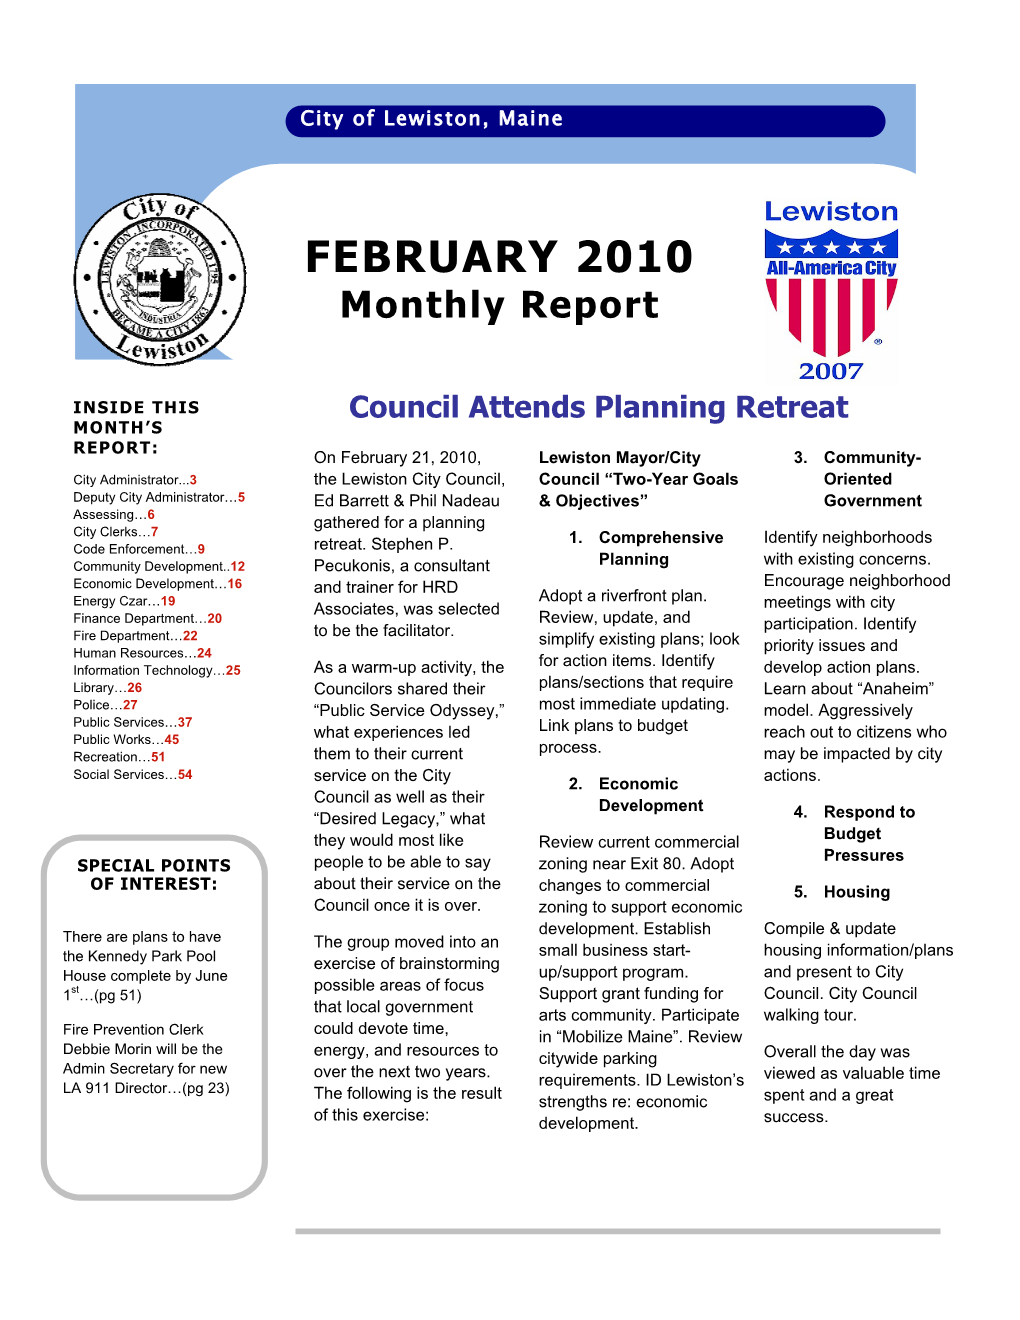 FEBRUARY 2010 Monthly Report